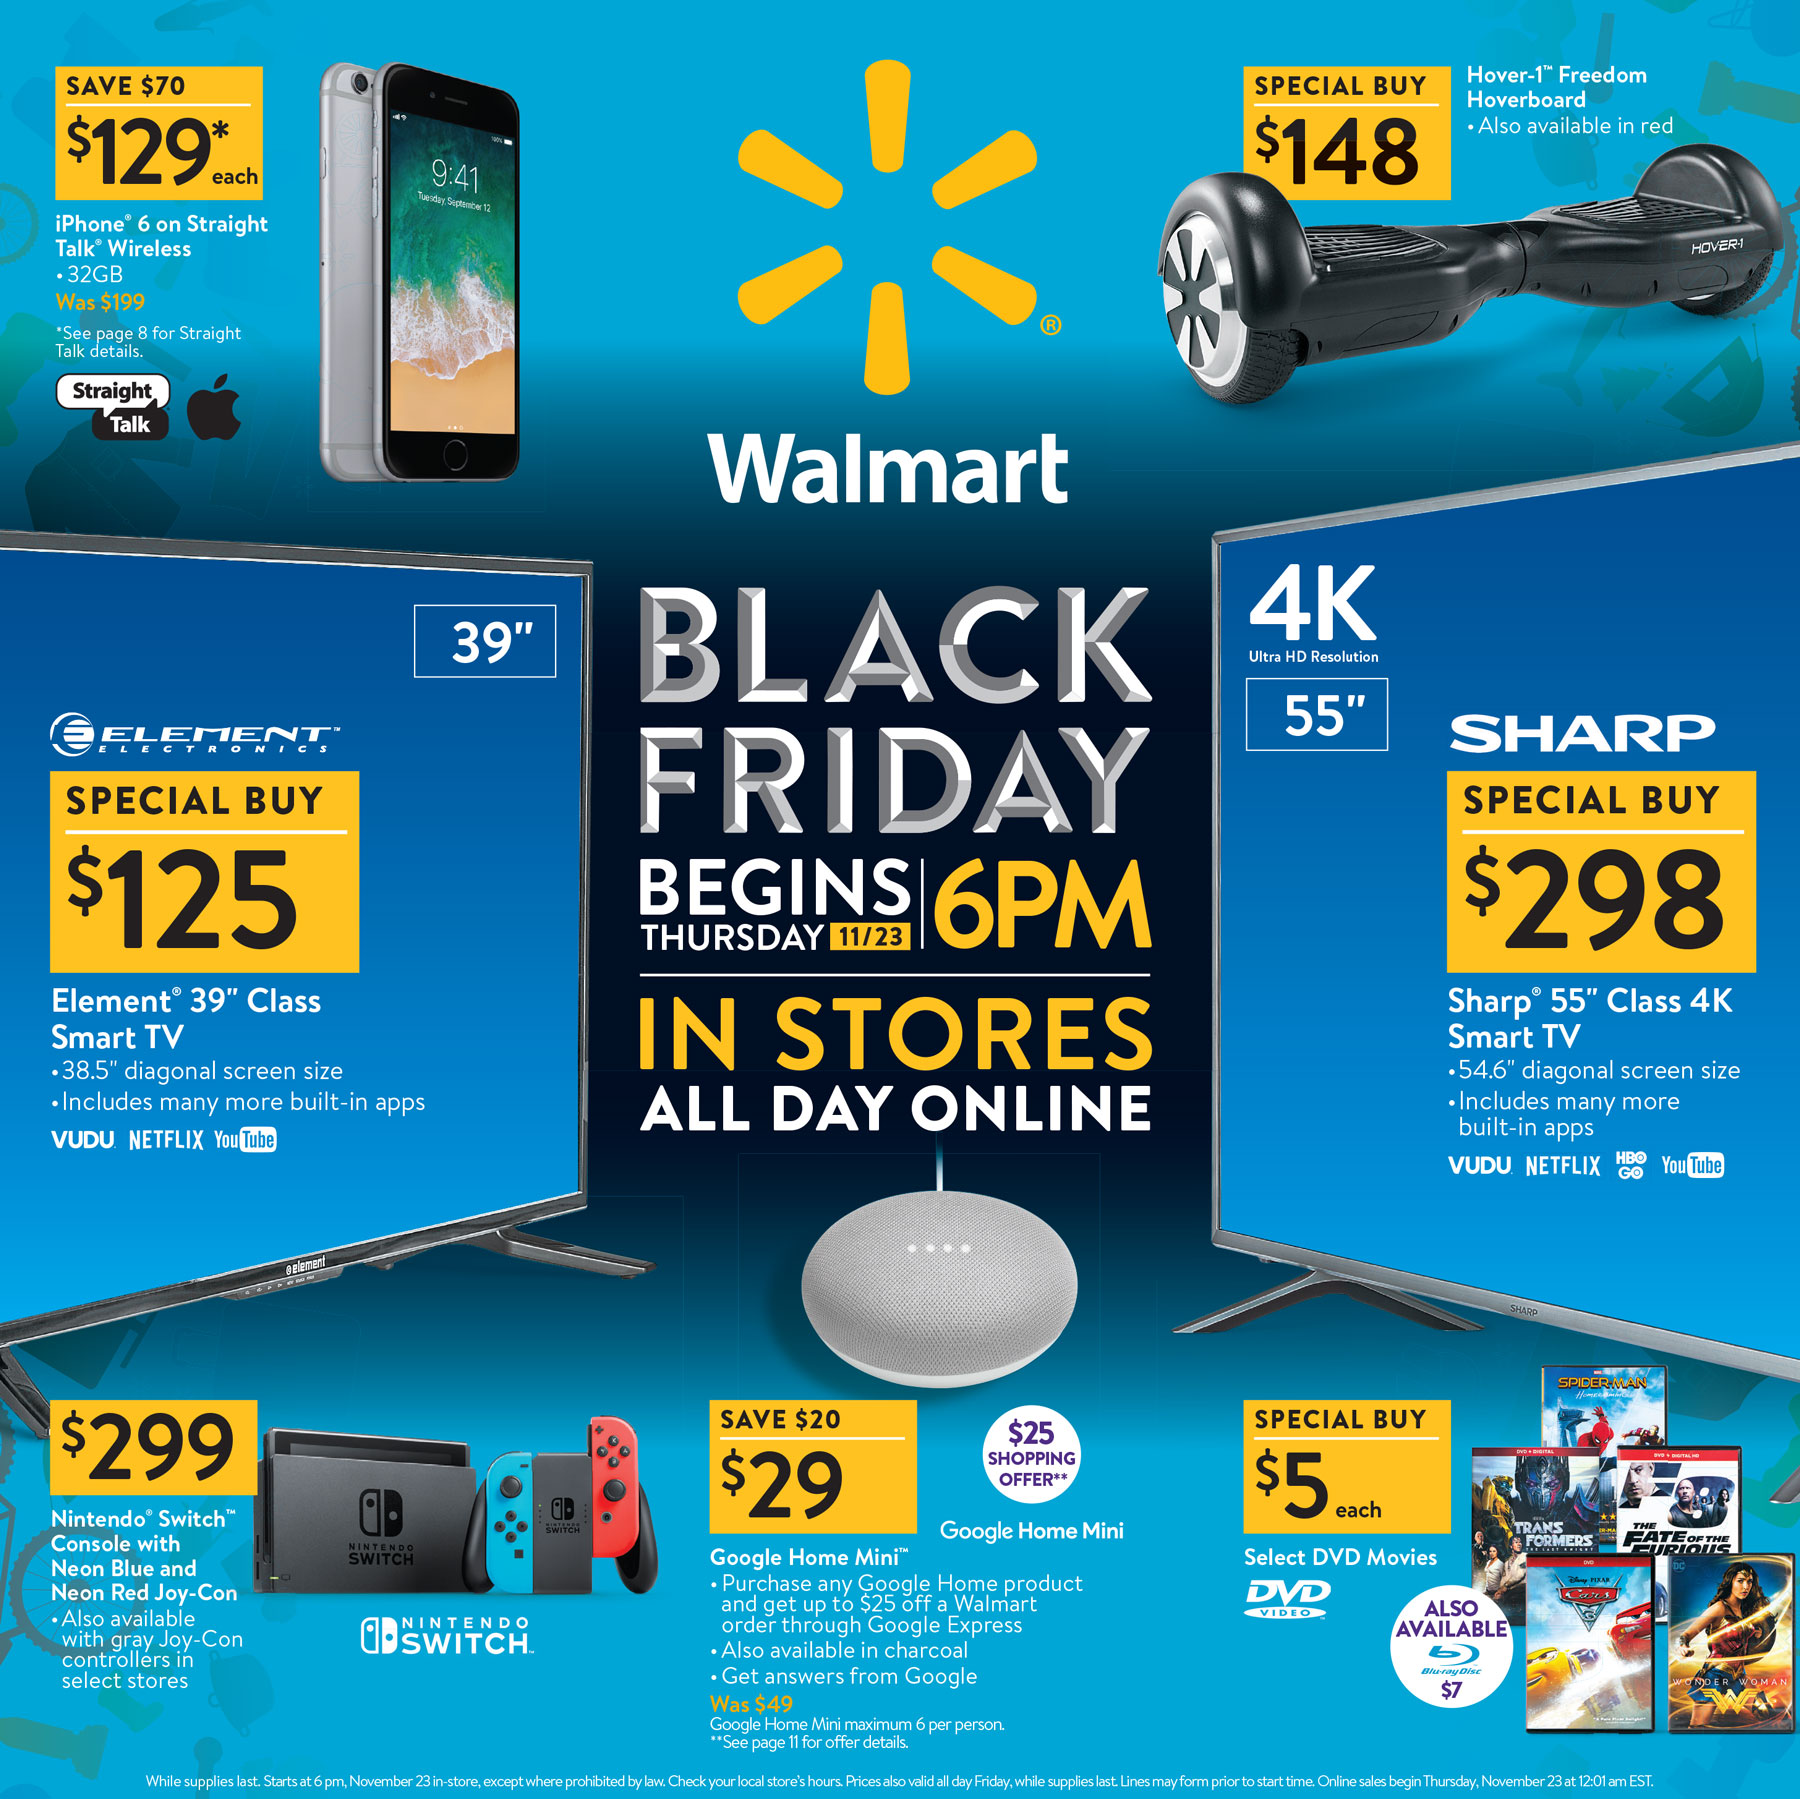 Walmart announces Black Friday 2017 plans: Everything you need to know – BGR